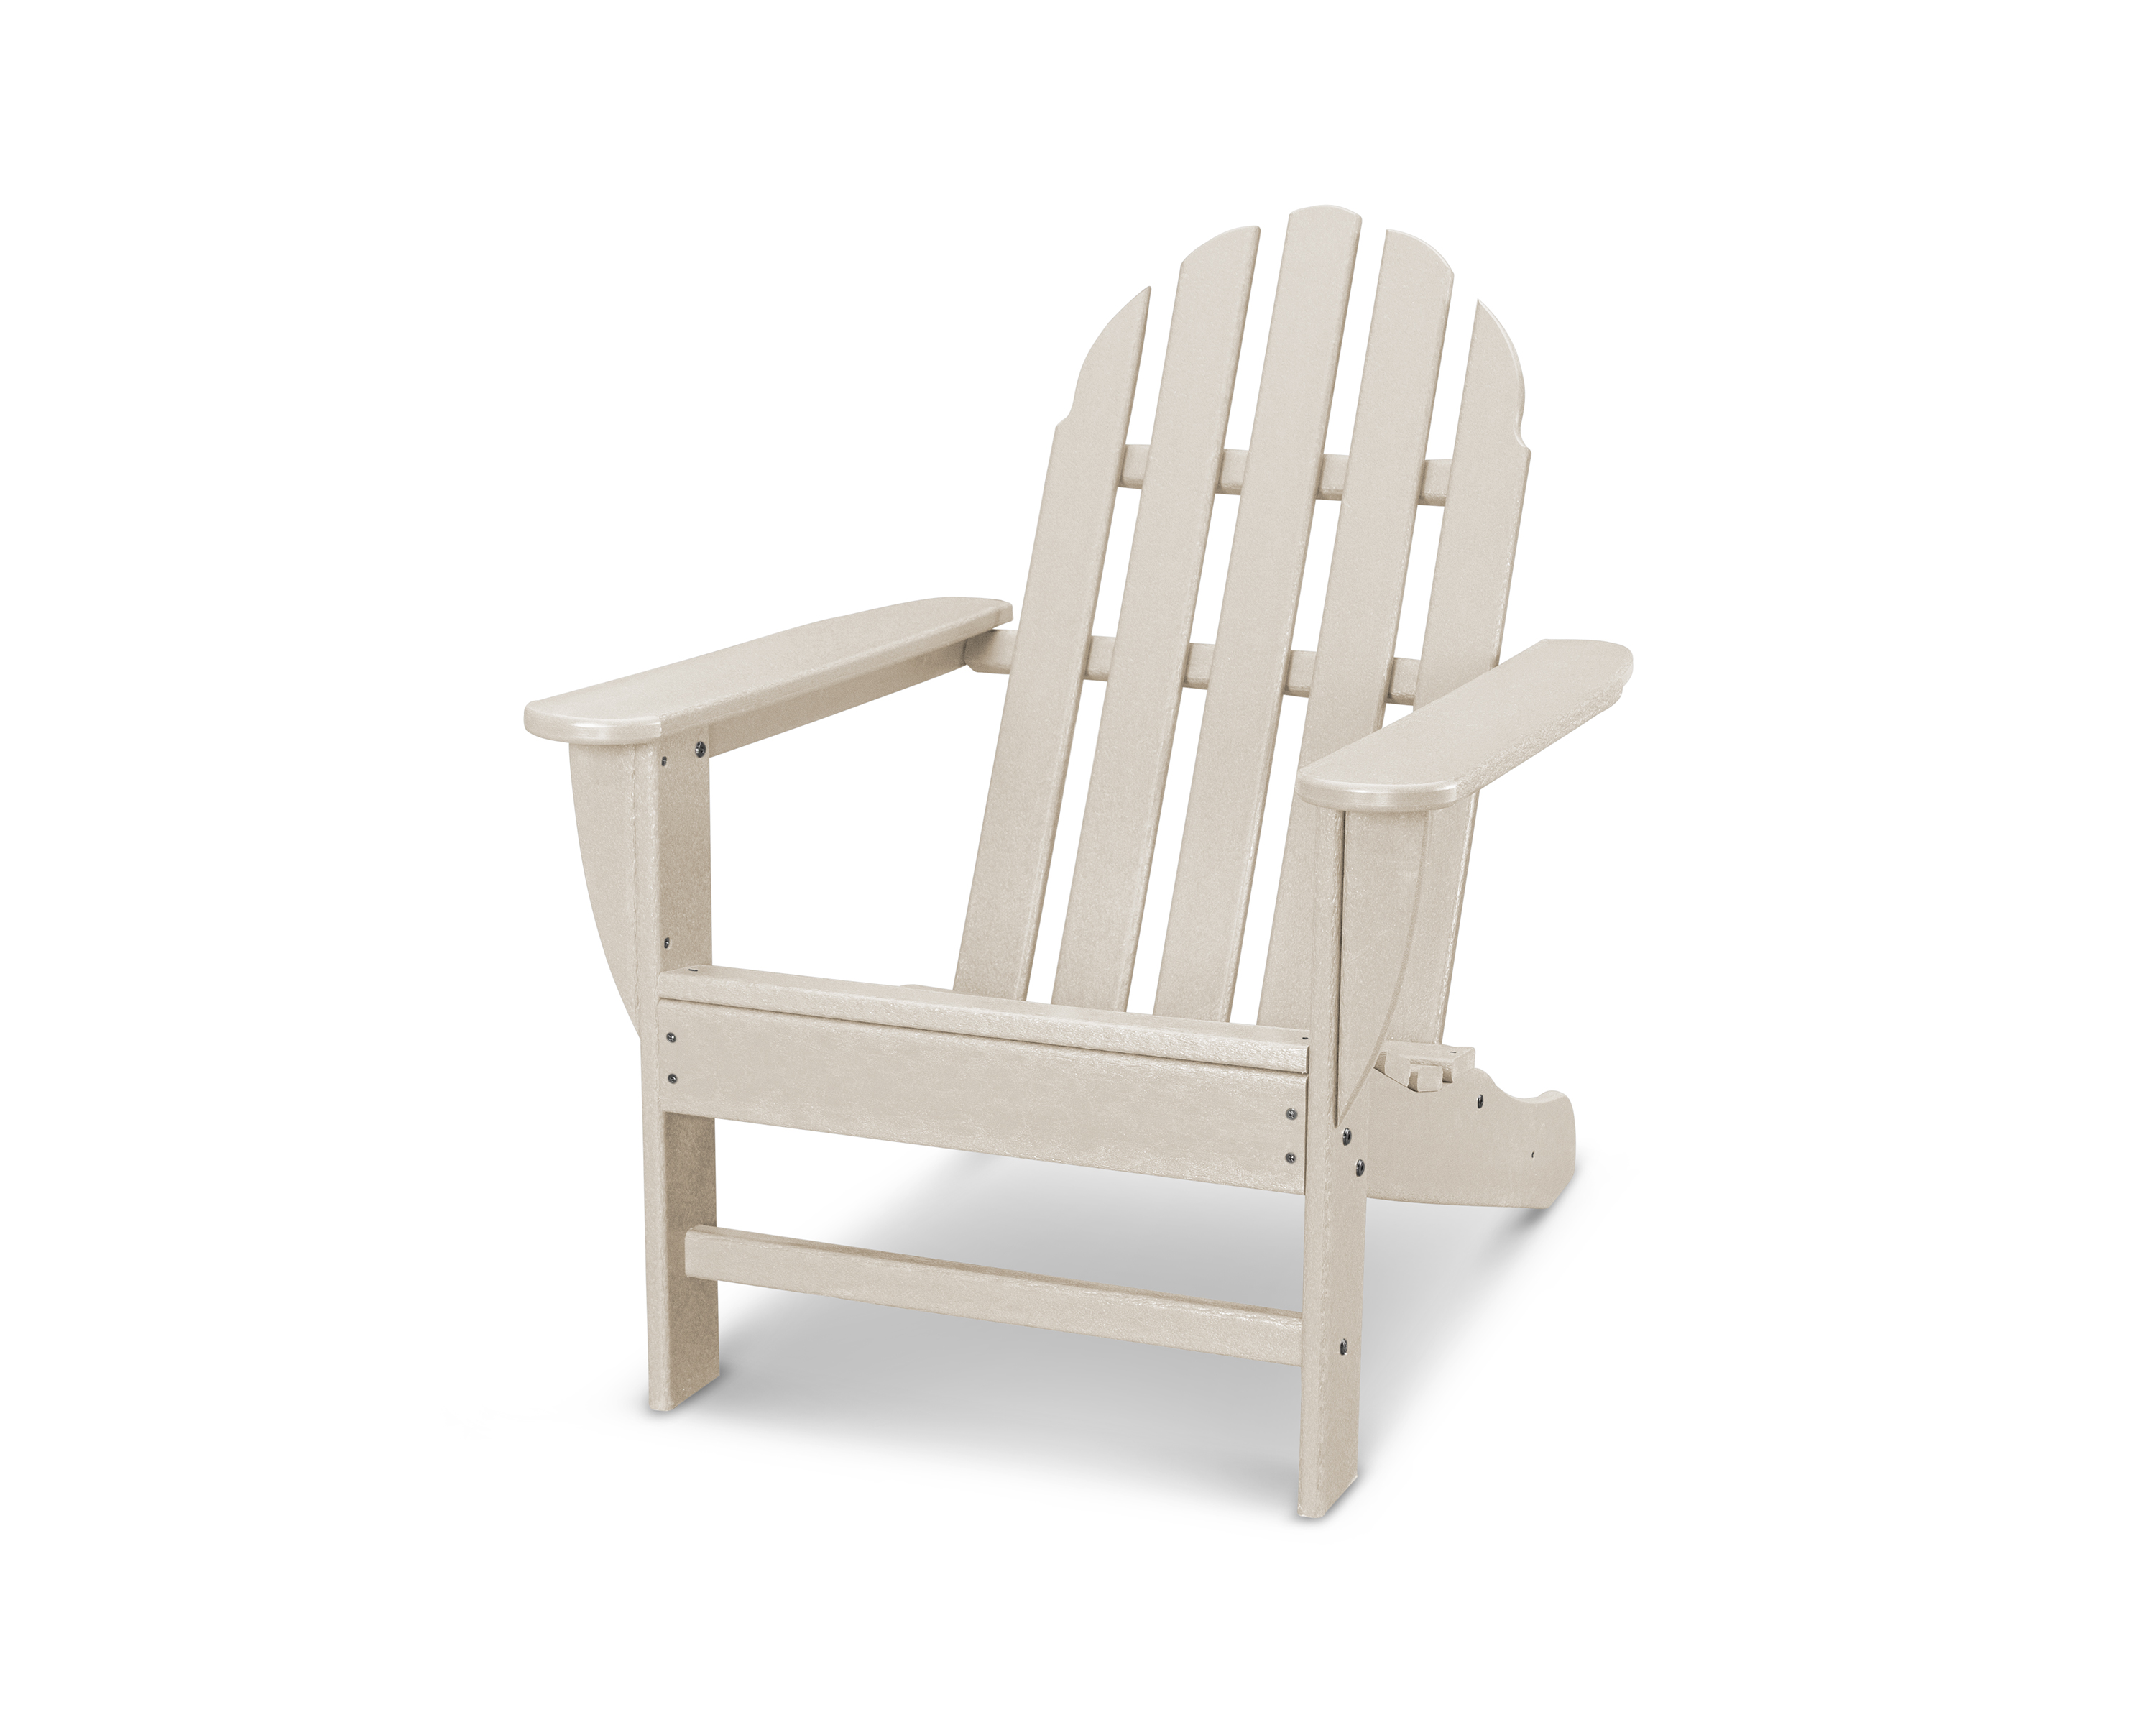 classic adirondack chair in sand thumbnail image